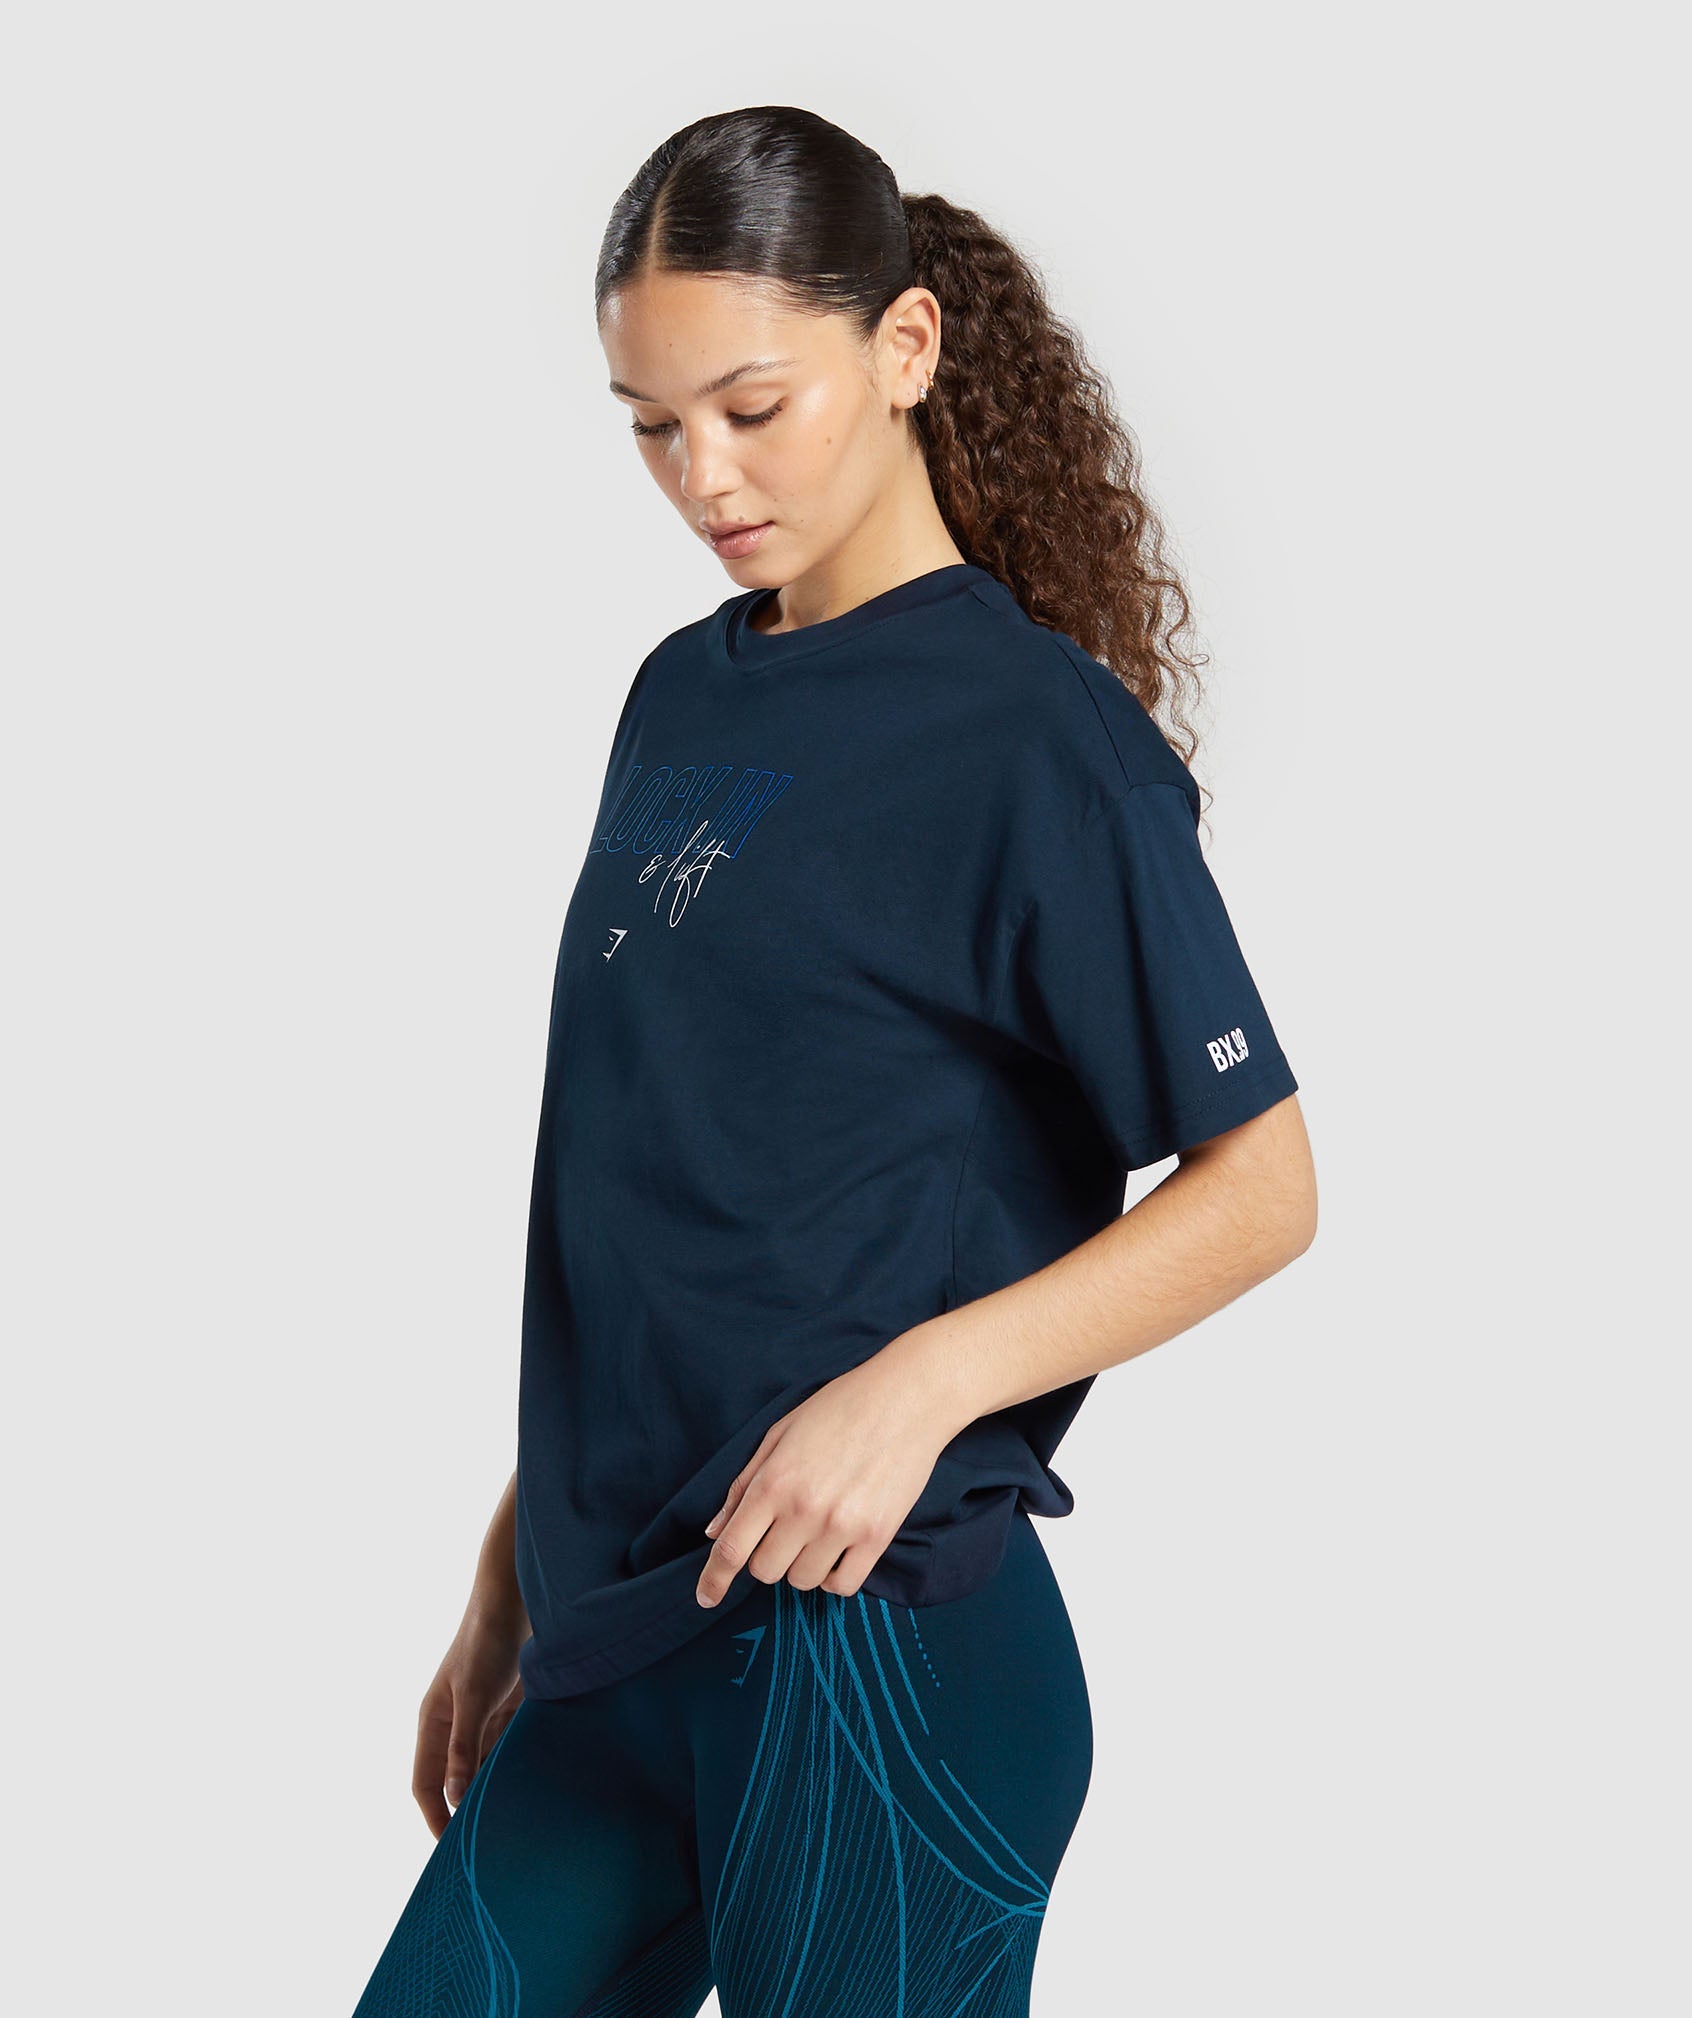 GS x Analis T-Shirt in Midnight Blue - view 3